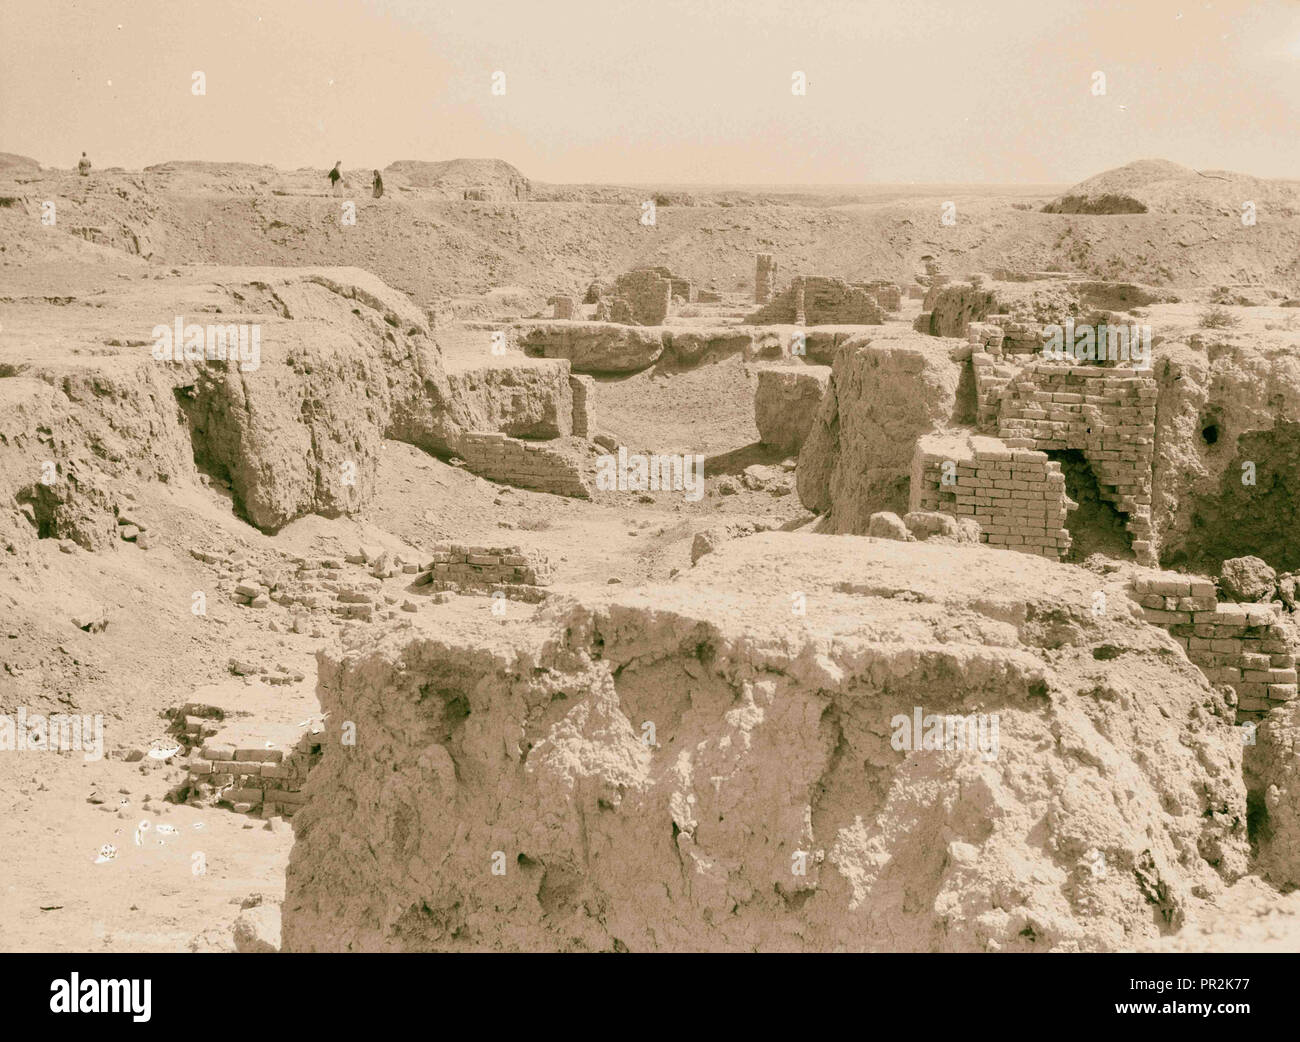 Iraq. Babylon 'the great.' Various views of the crumbling ruins. Remains of Belshazzar's palace. 1932, Iraq, Babylon Stock Photo